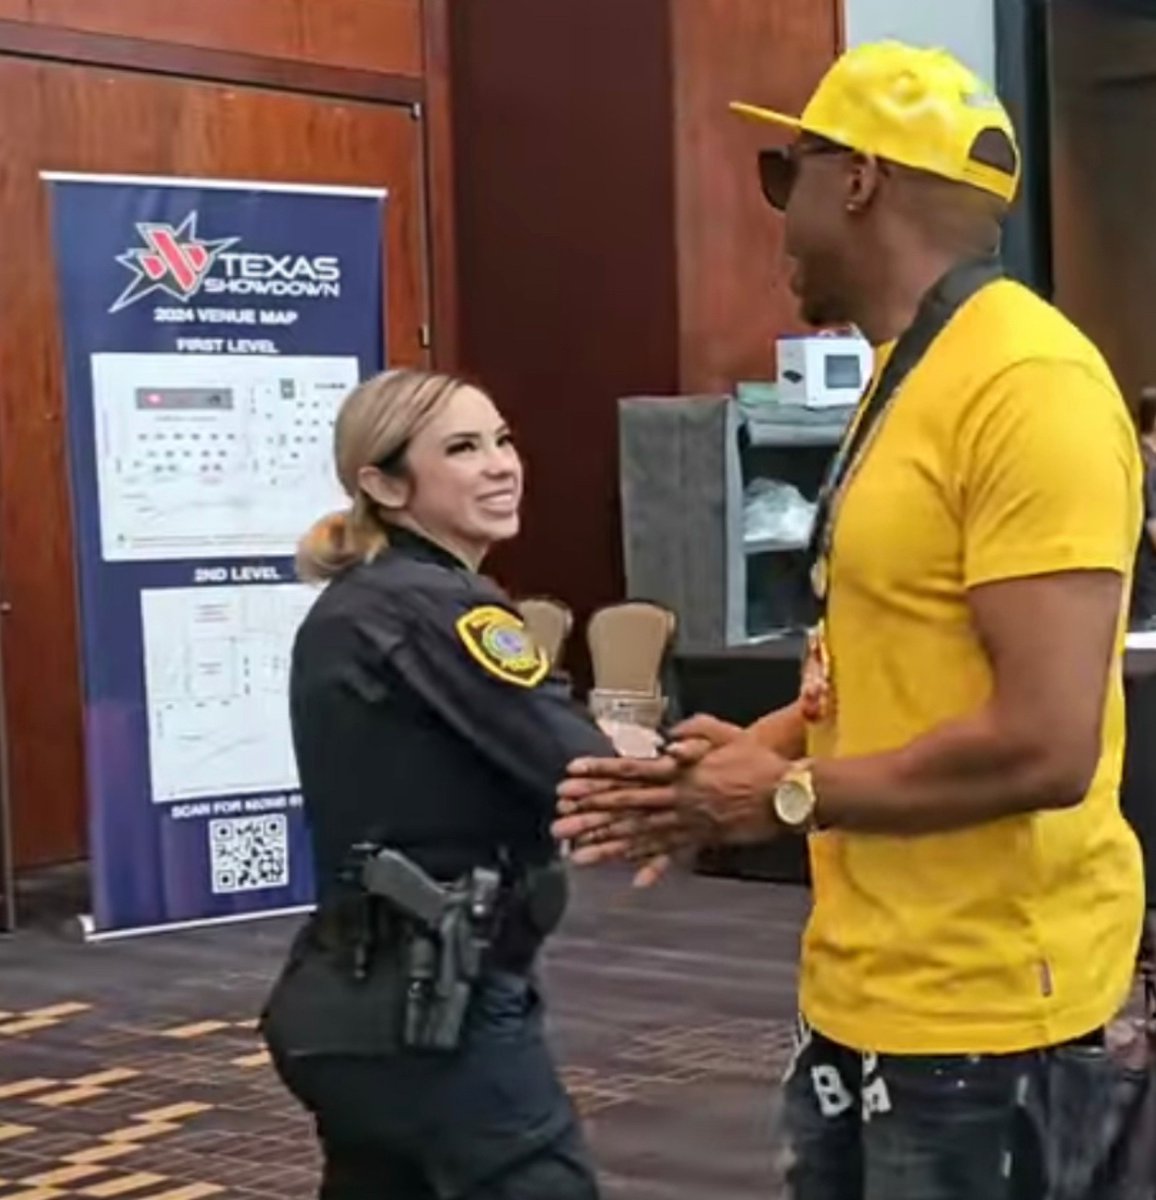 Whole new meaning to “FUCK THE POLICE” 😂👮🏼I mean damn even the cops are hot in #Houston #Texas 🔥 @TeamStrike1st at #TXS24 @Texas_Showdown 🖖🏾🧑🏾‍🚀 You see her glowing smile ? Yeah I have that affect on the ladies 🤷🏾‍♂️💯😂🤦🏾‍♂️ She can cuff me ANYTIME lol

Linktr.ee/GalaxyB